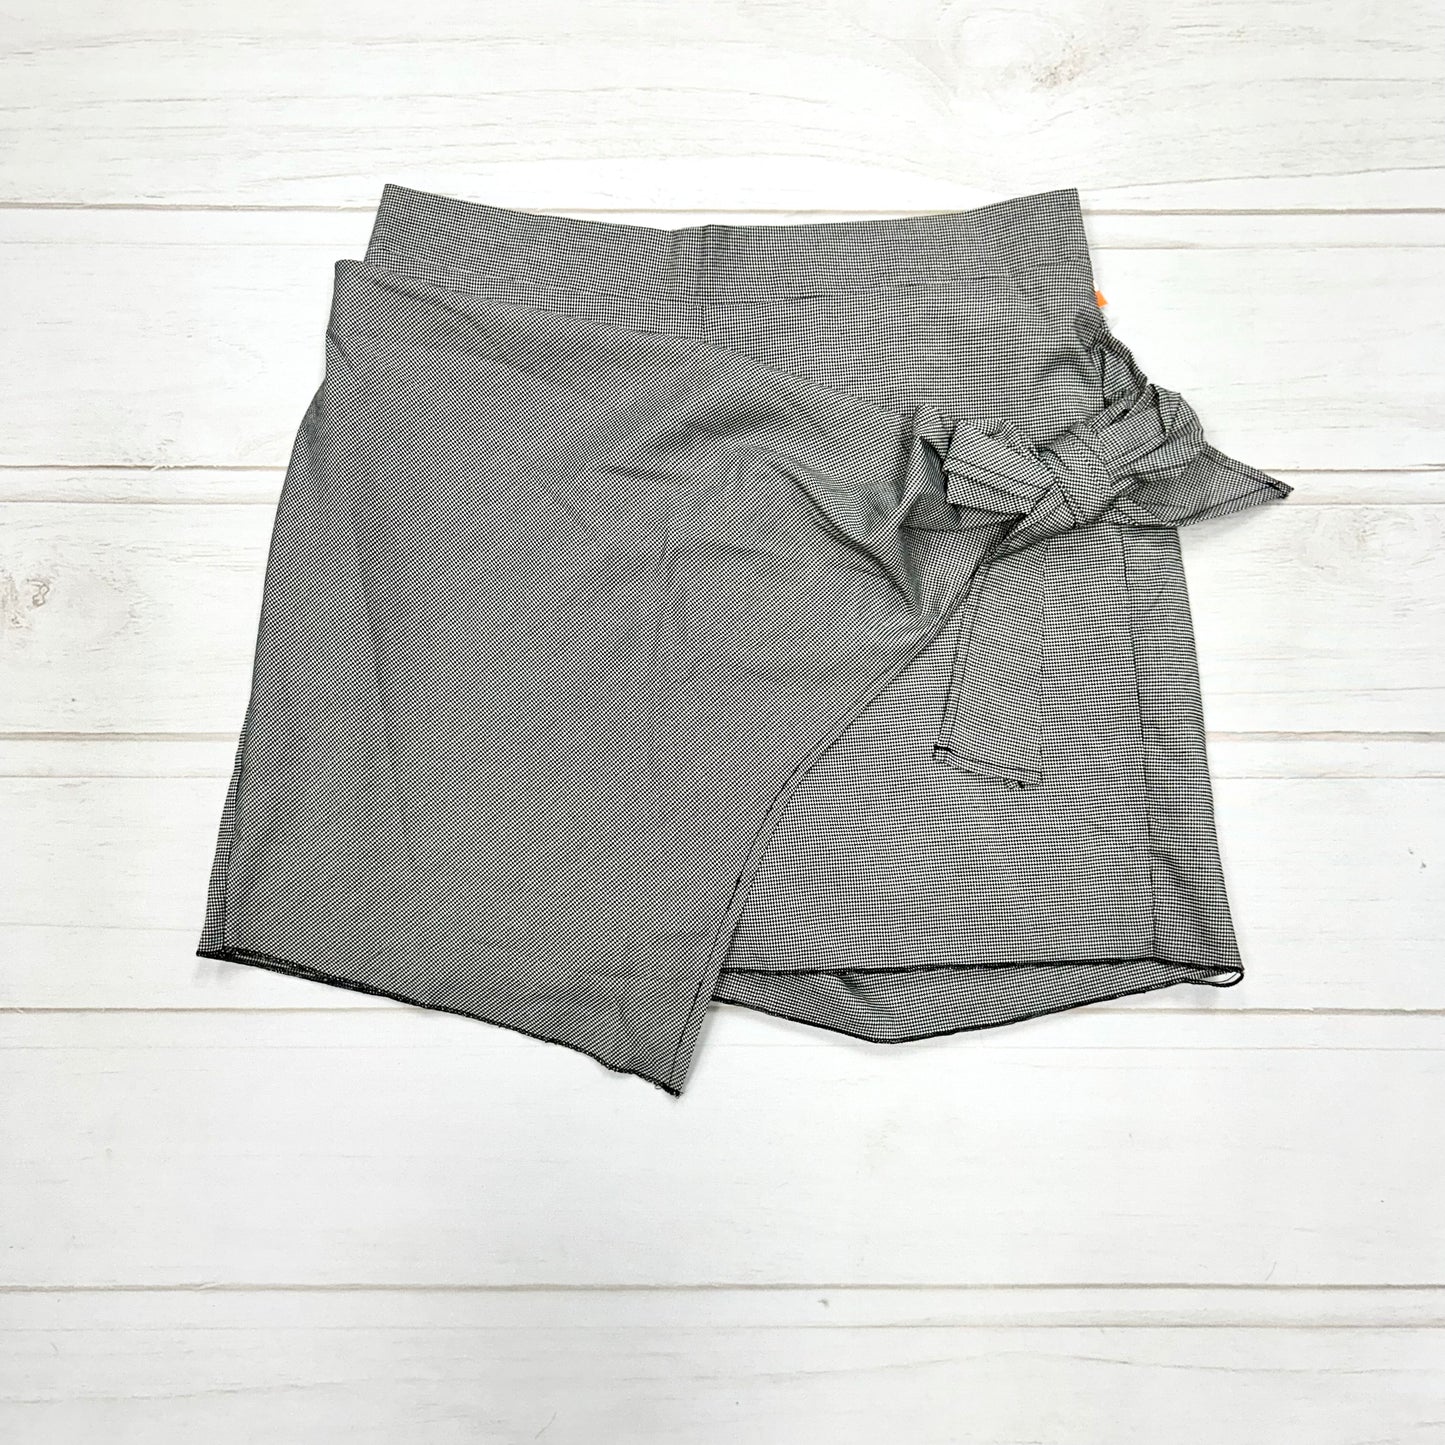 Skirt Mini & Short By Free People  Size: L